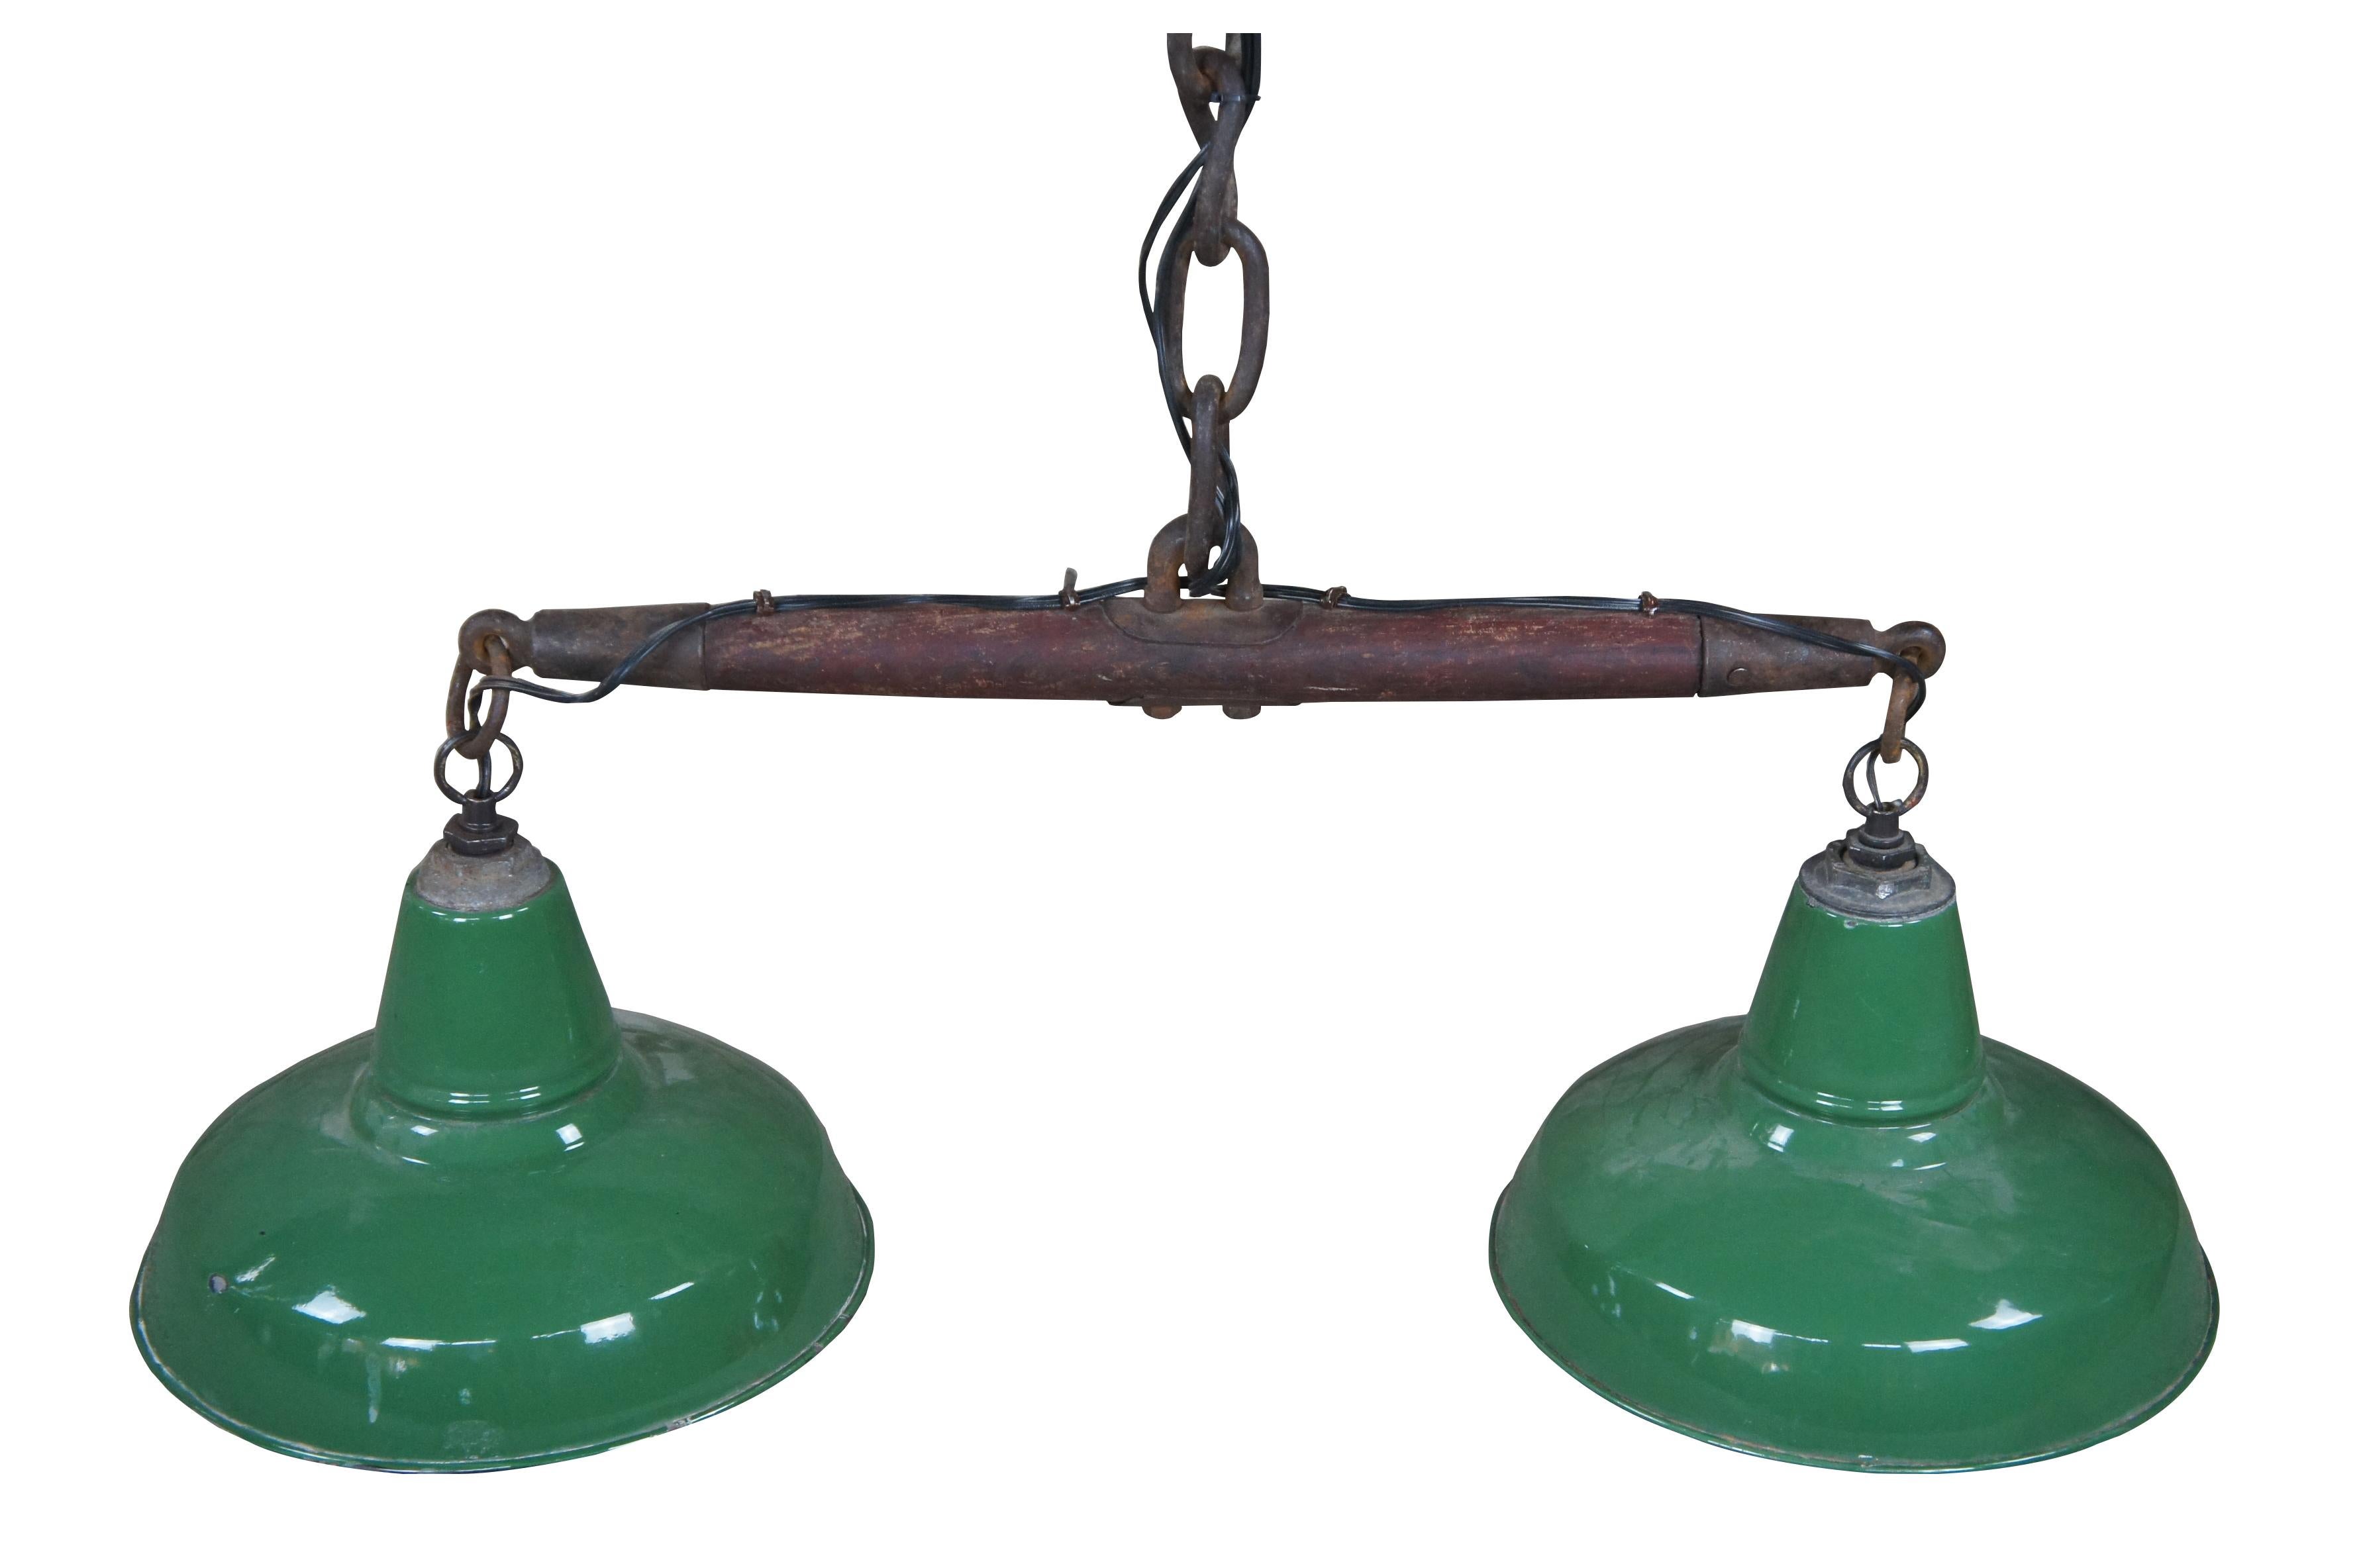 Antique reclaimed industrial green enameled two light hanging lamp or lantern made with a single tree horse harness with heavy iron chain. Measure: 36